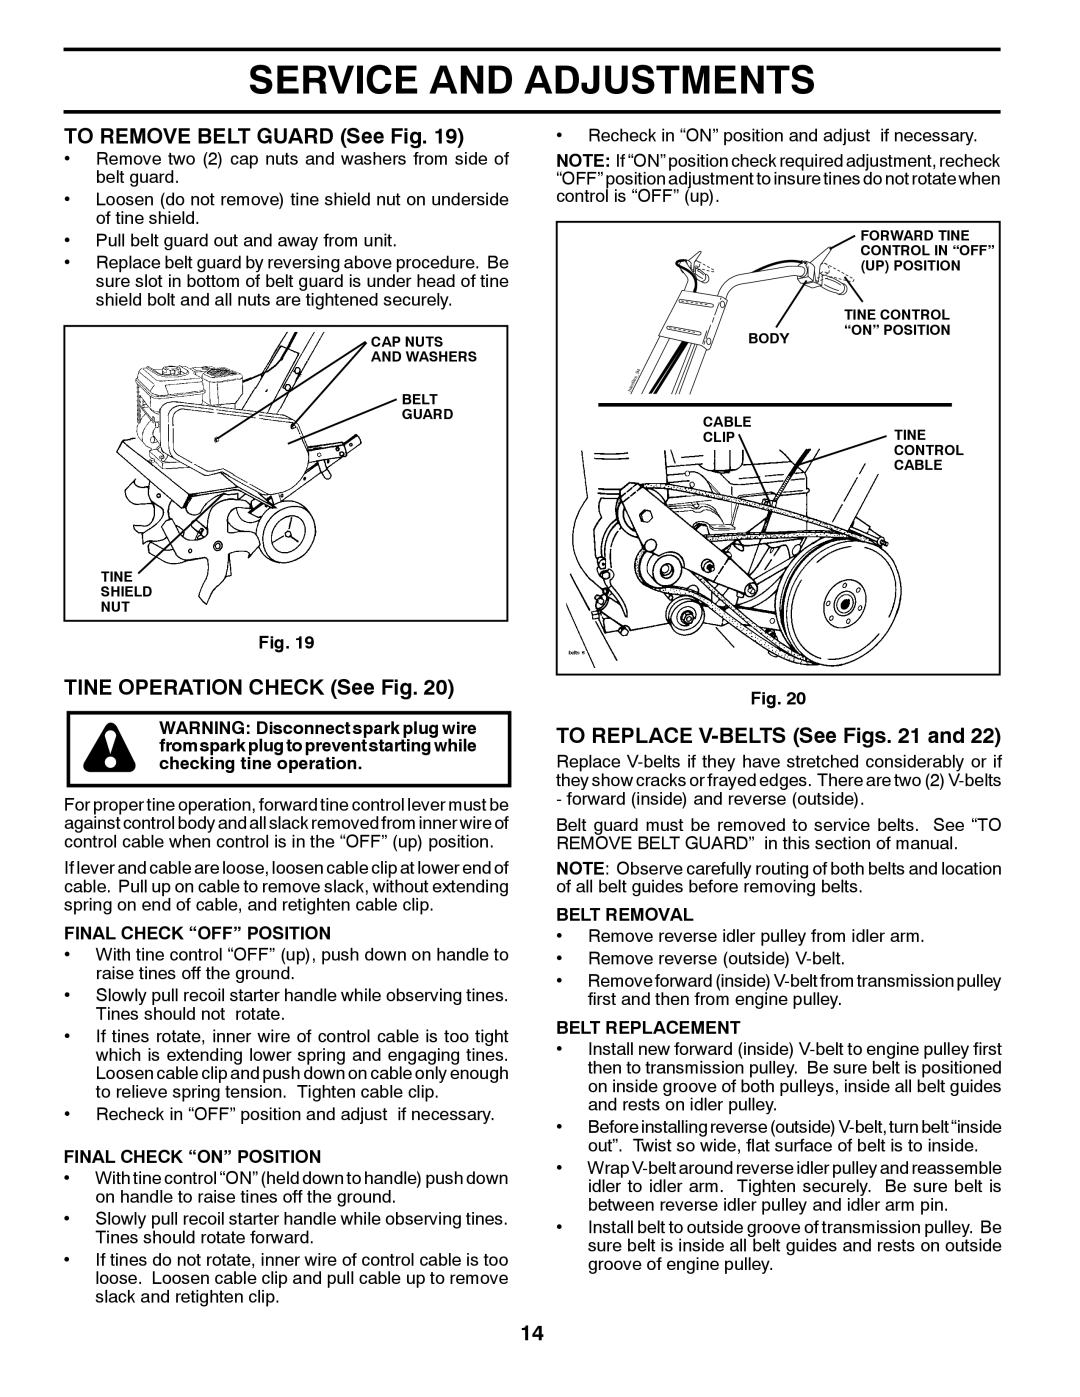 Husqvarna FT900 owner manual TO REMOVE BELT GUARD See Fig, TINE OPERATION CHECK See Fig, TO REPLACE V-BELTSSee Figs. 21 and 